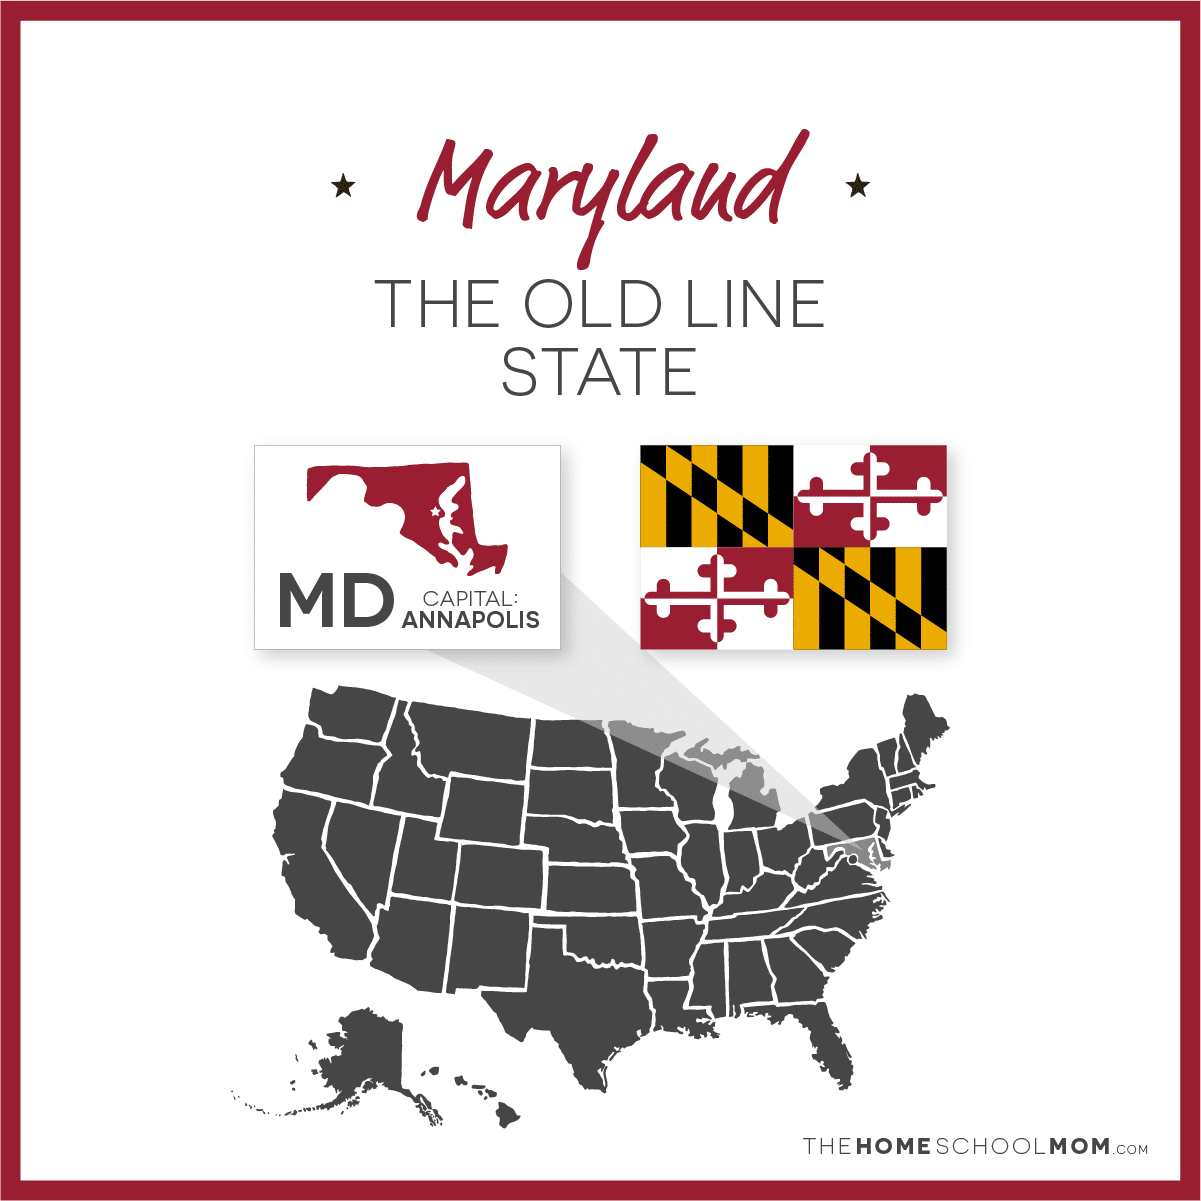 Map of US with Maryland highlighted and text Maryland - The Old Line State; capital – Annapolis